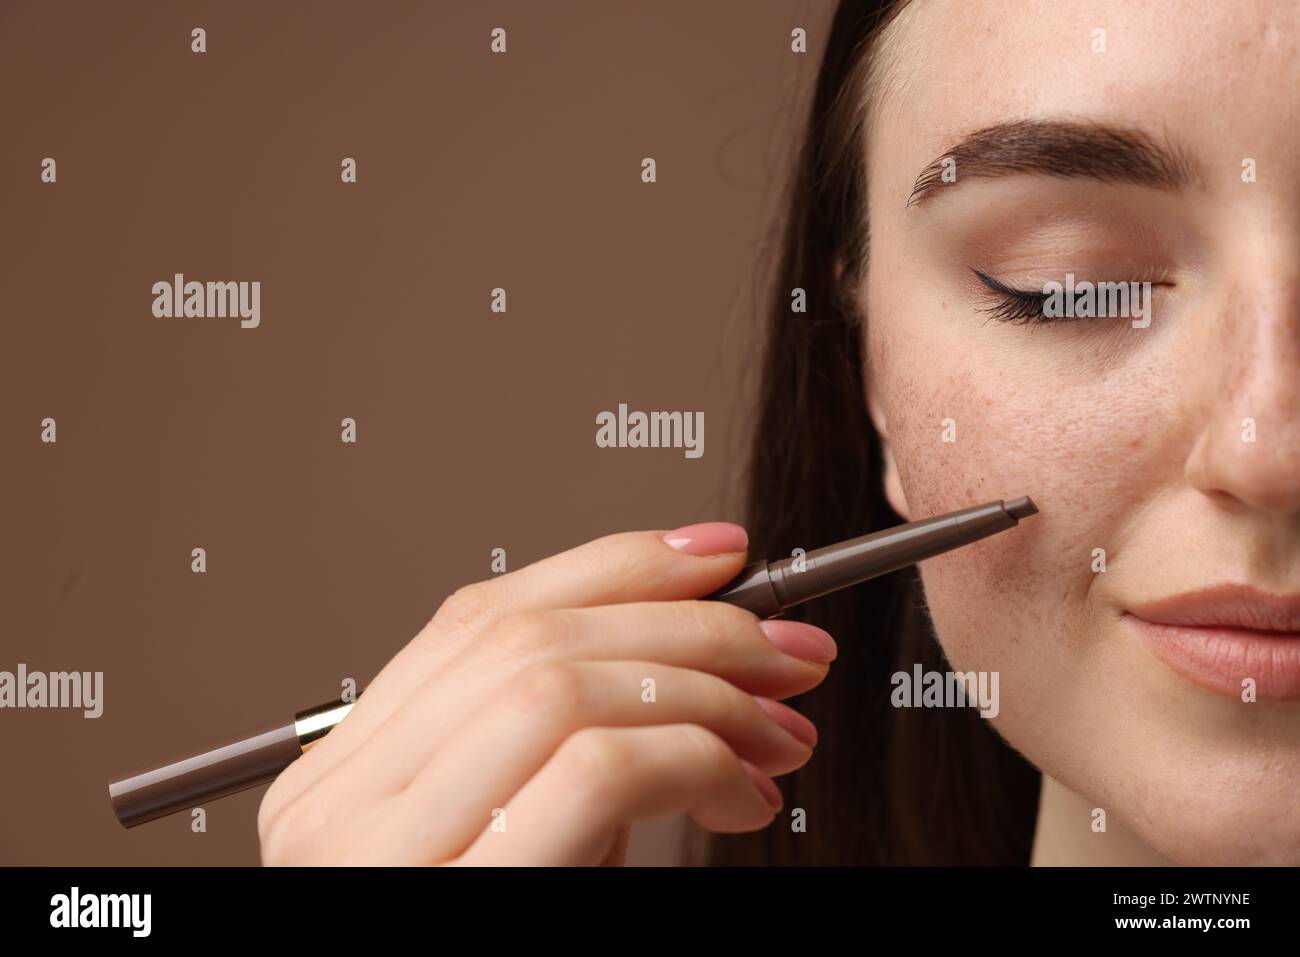 Beautiful woman drawing freckles with pen on brown background, closeup Stock Photo